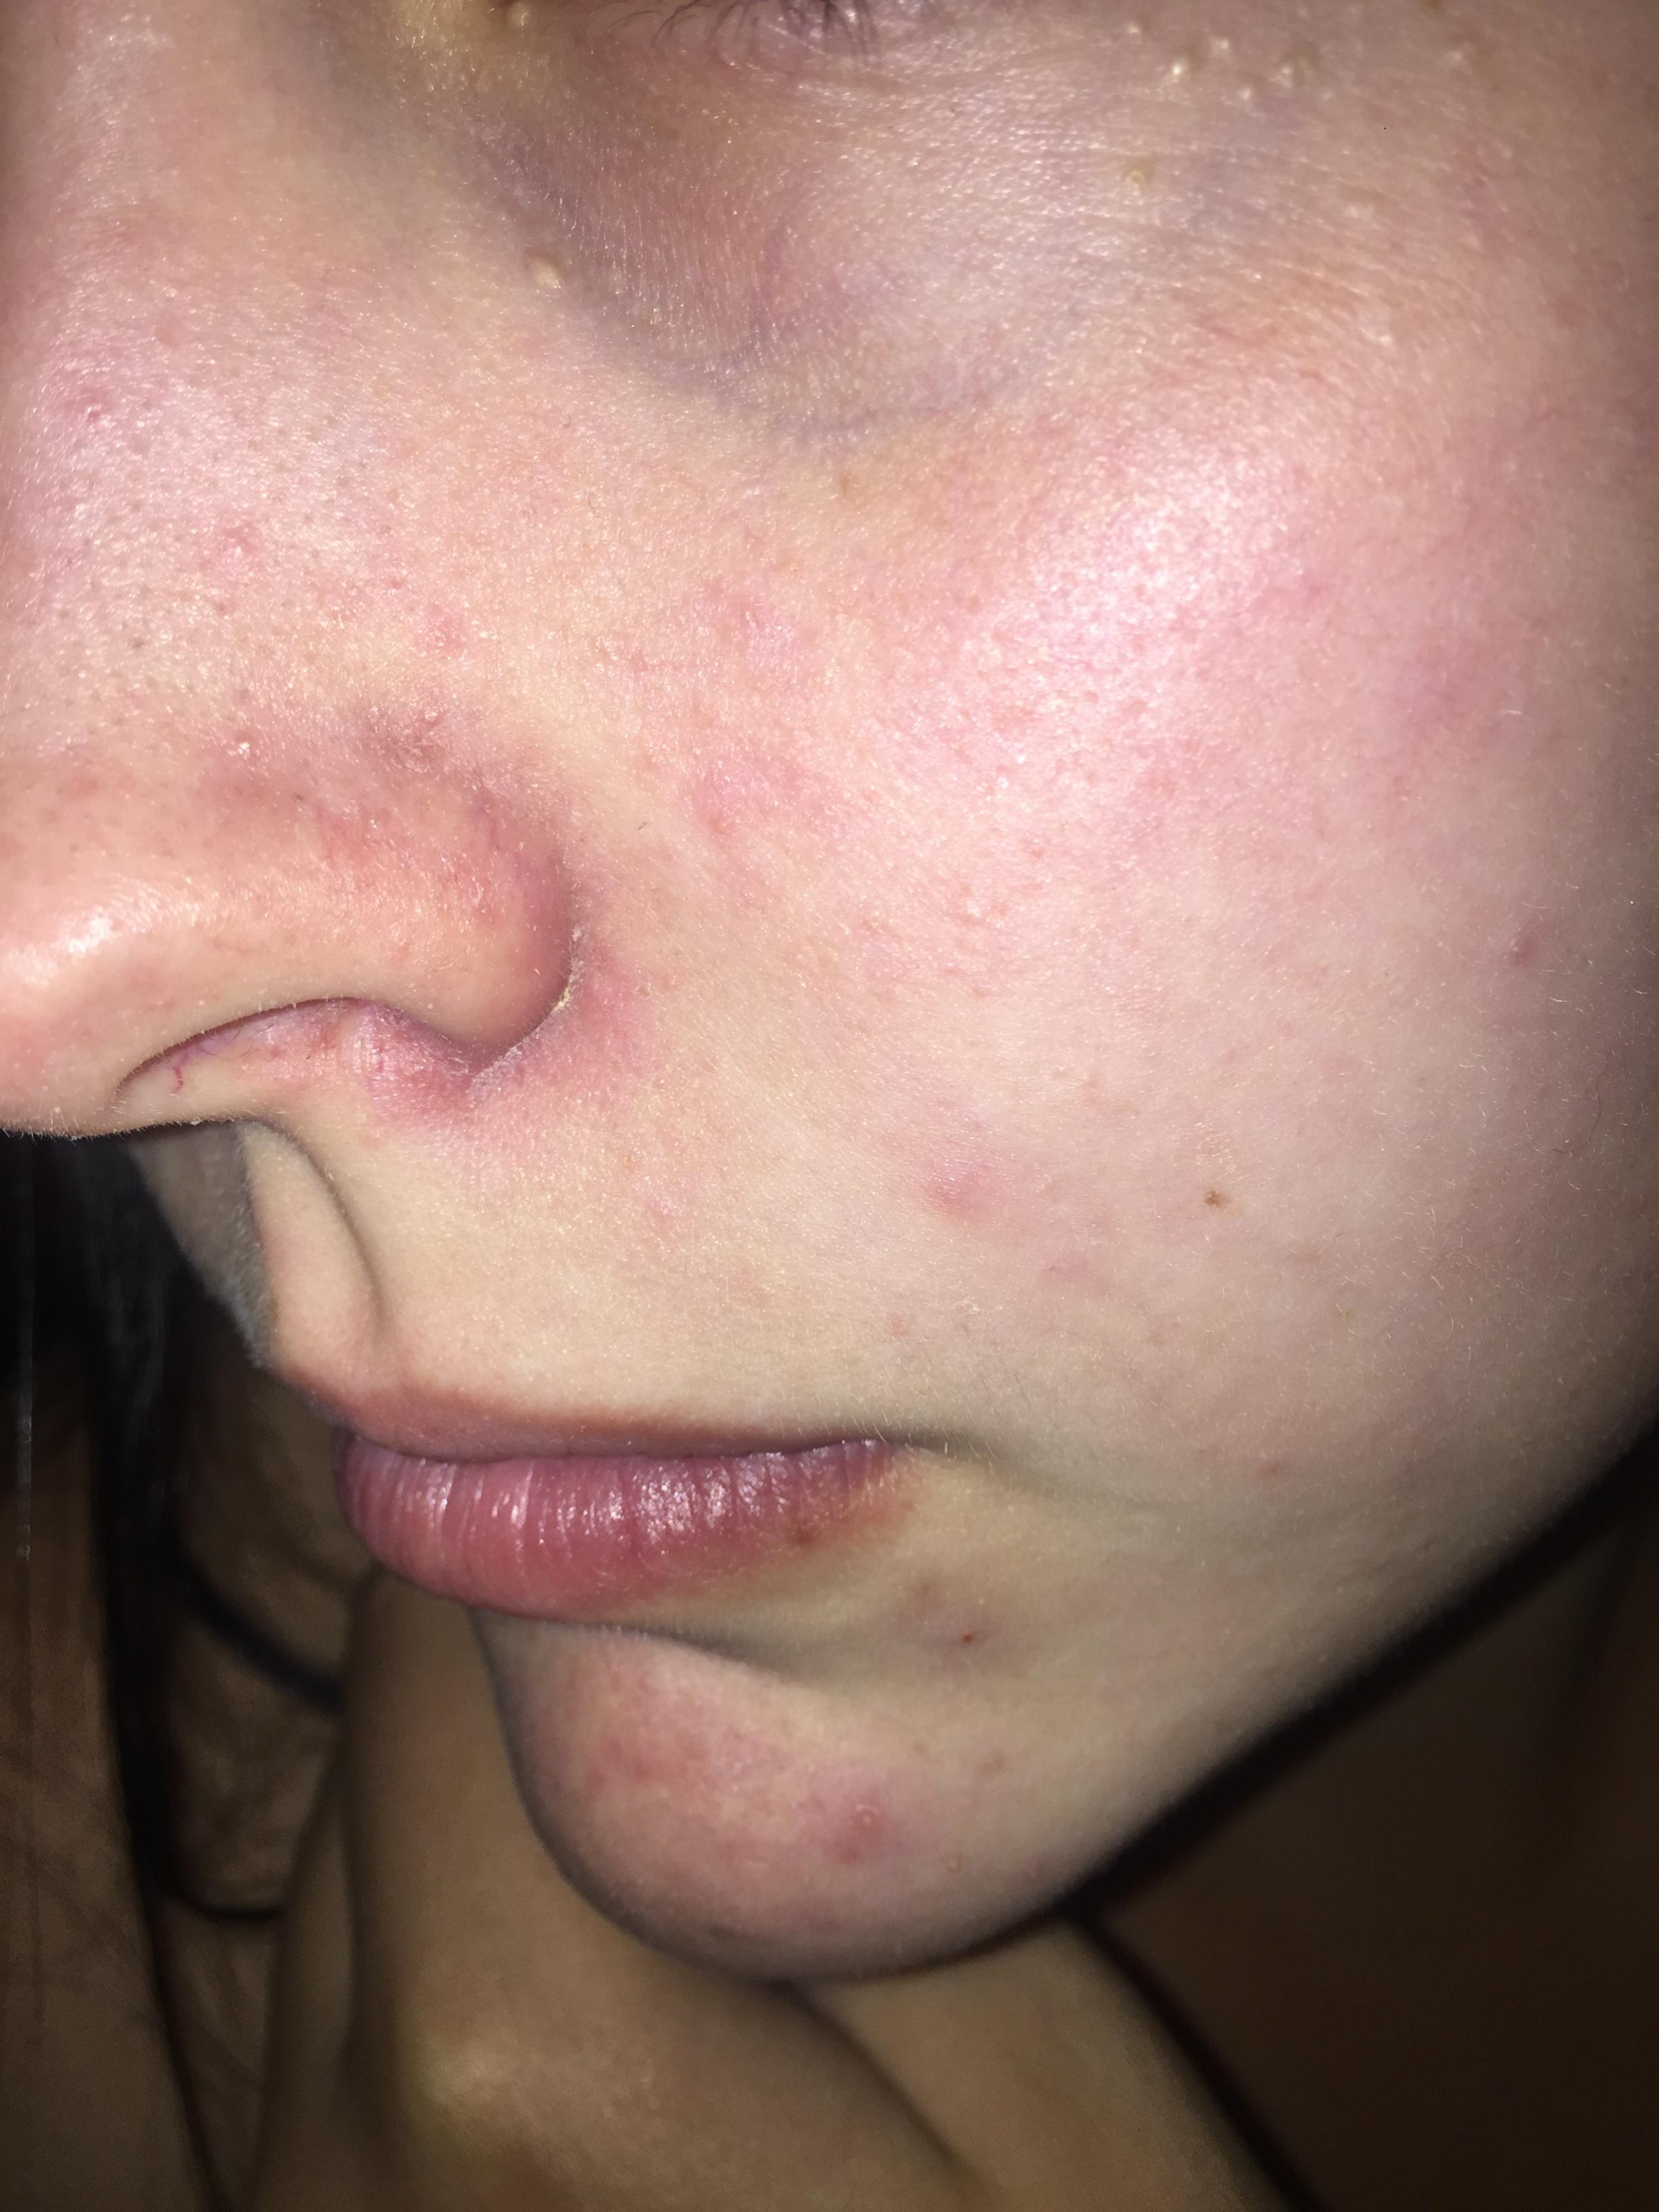 Rednessirritated Appearance On Face Rosacea And Facial Redness By